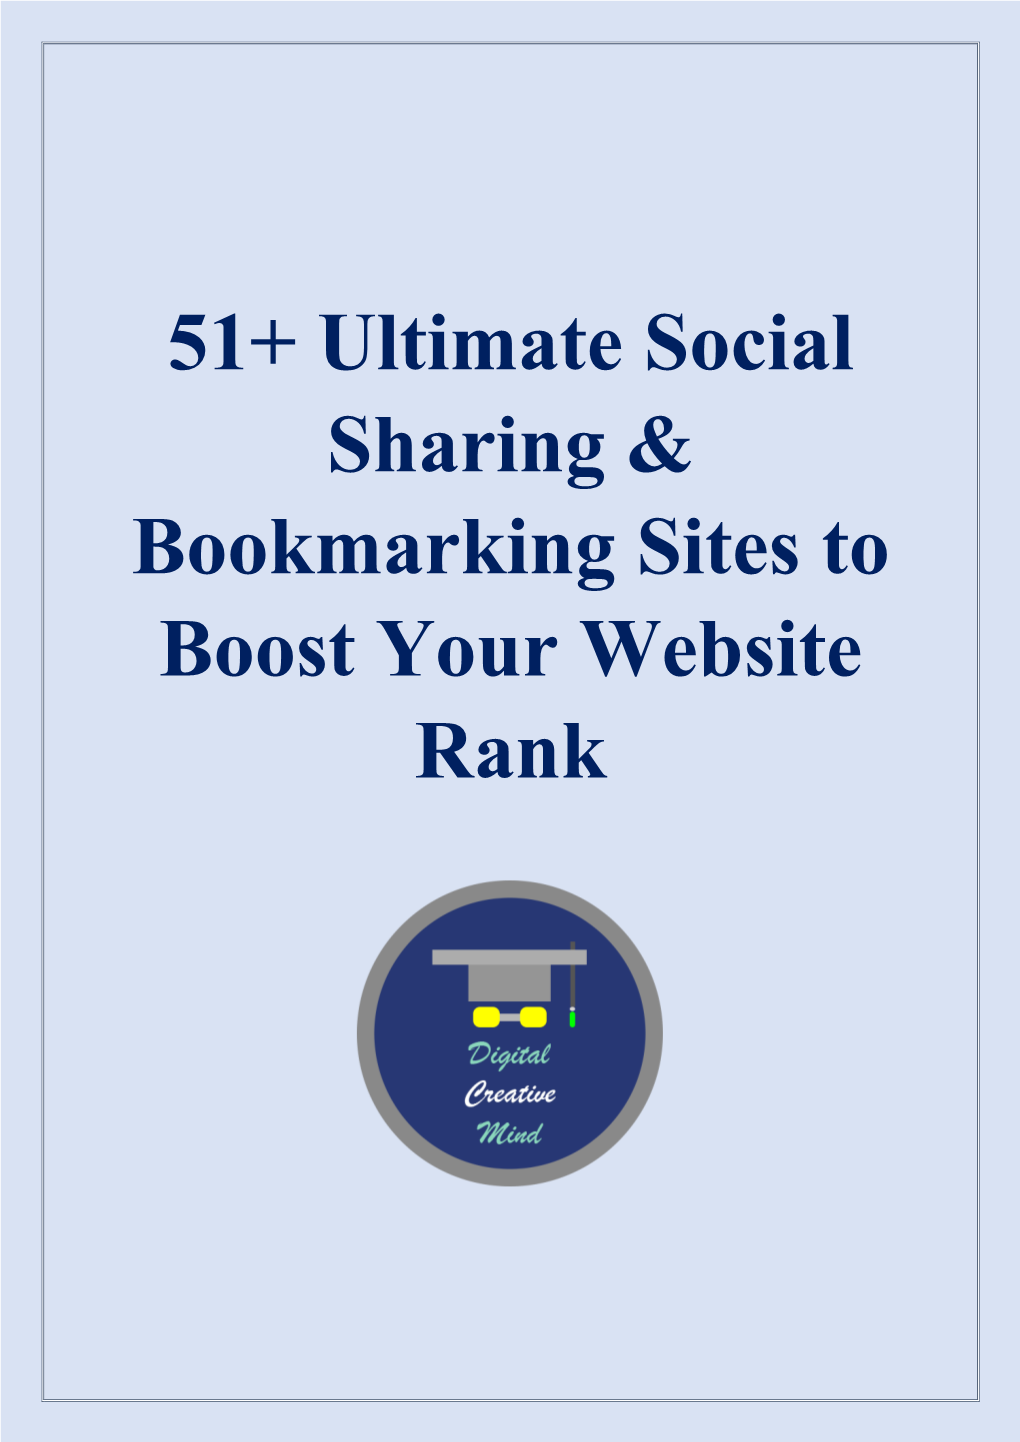 51+ Ultimate Social Sharing & Bookmarking Sites to Boost Your